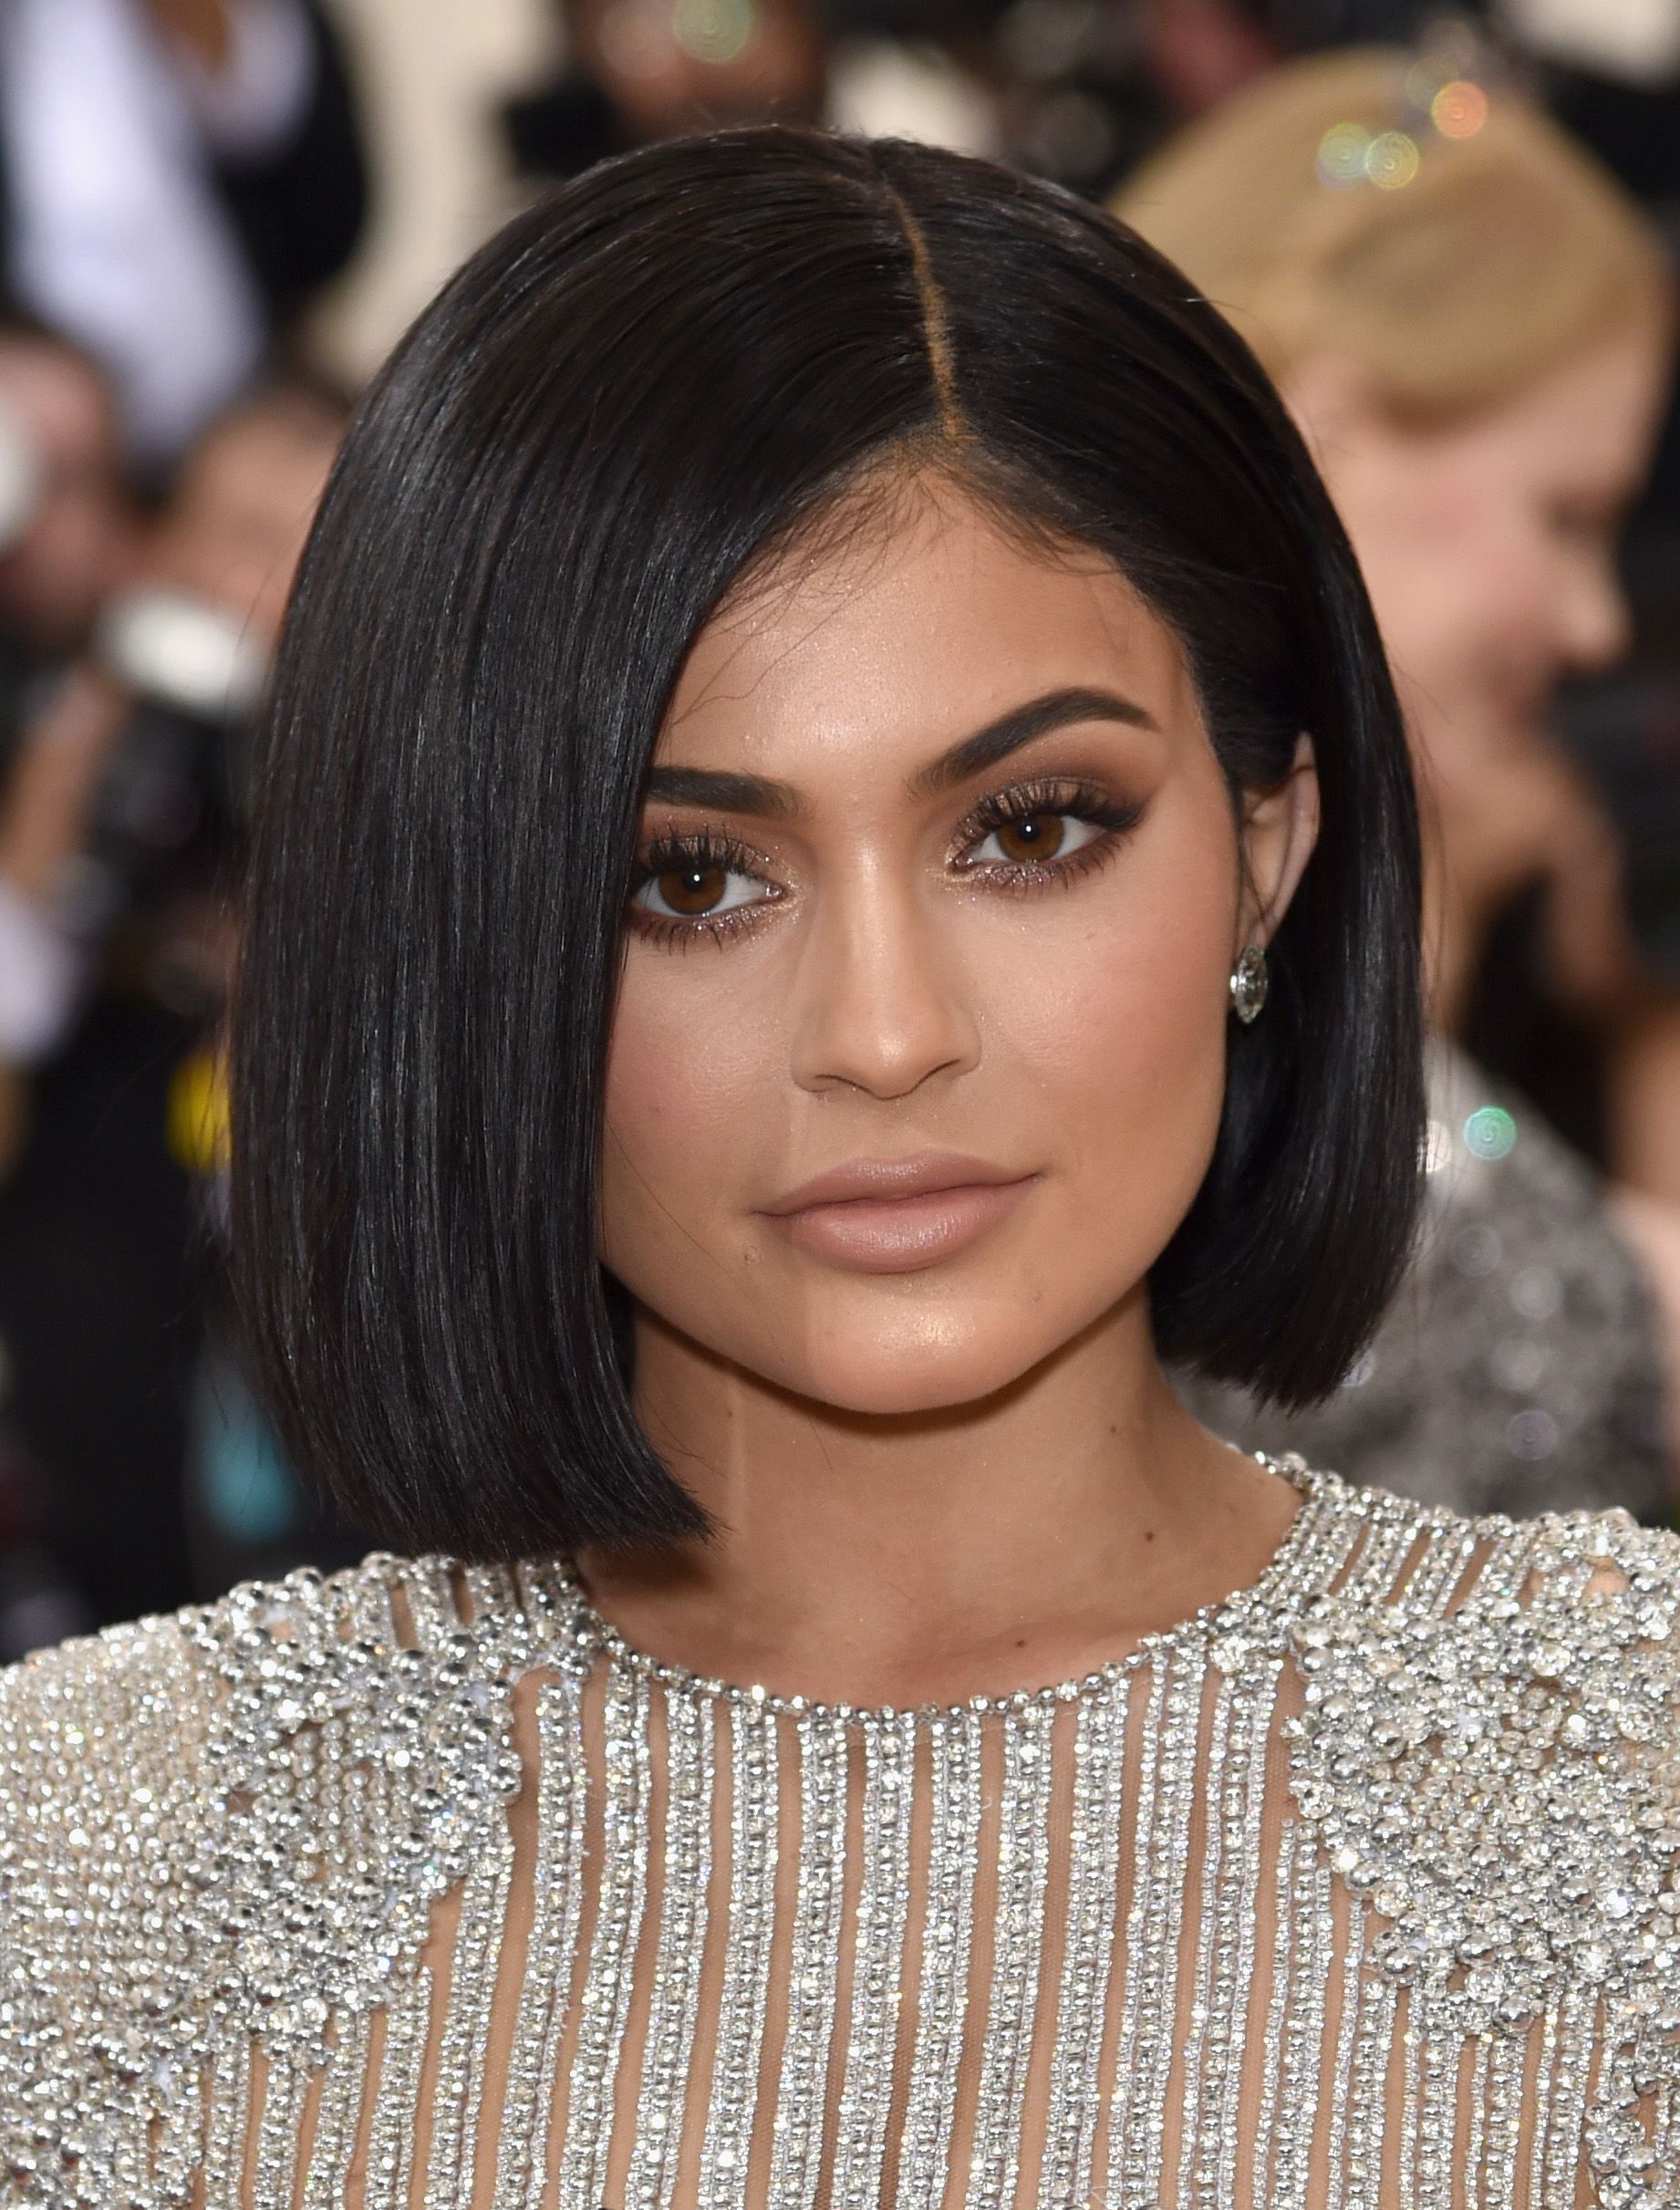 Kylie Jenner at the "Manus x Machina: Fashion in an Age of Technology" Costume Institute Gala Art on May 2, 2016 in N.Y. | Photo: Getty Images